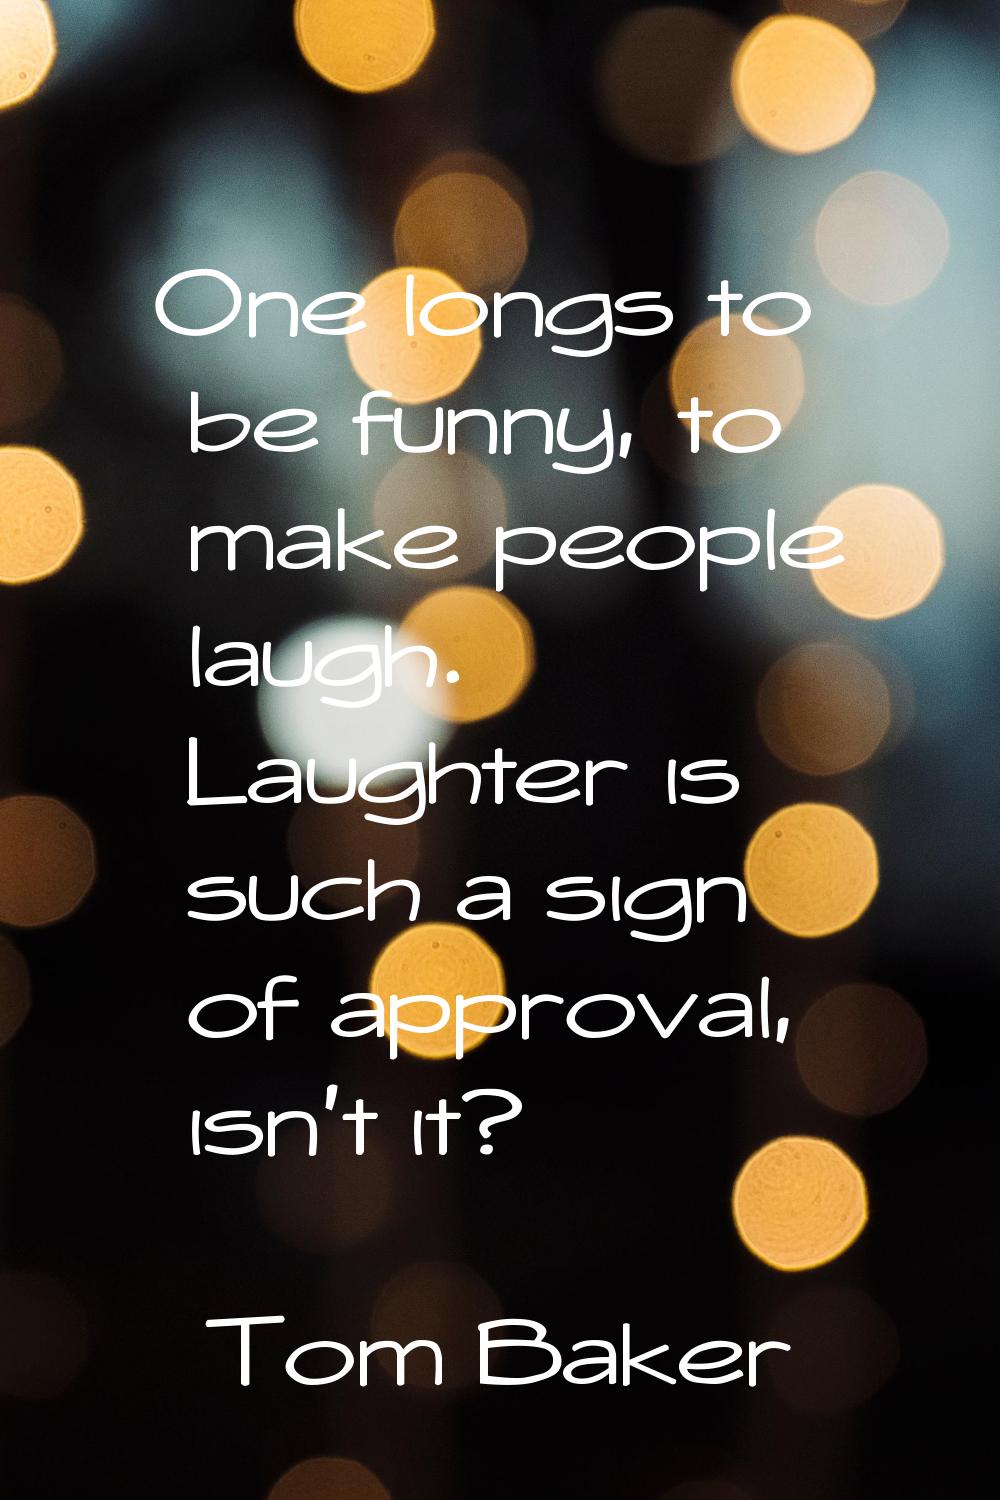 One longs to be funny, to make people laugh. Laughter is such a sign of approval, isn't it?